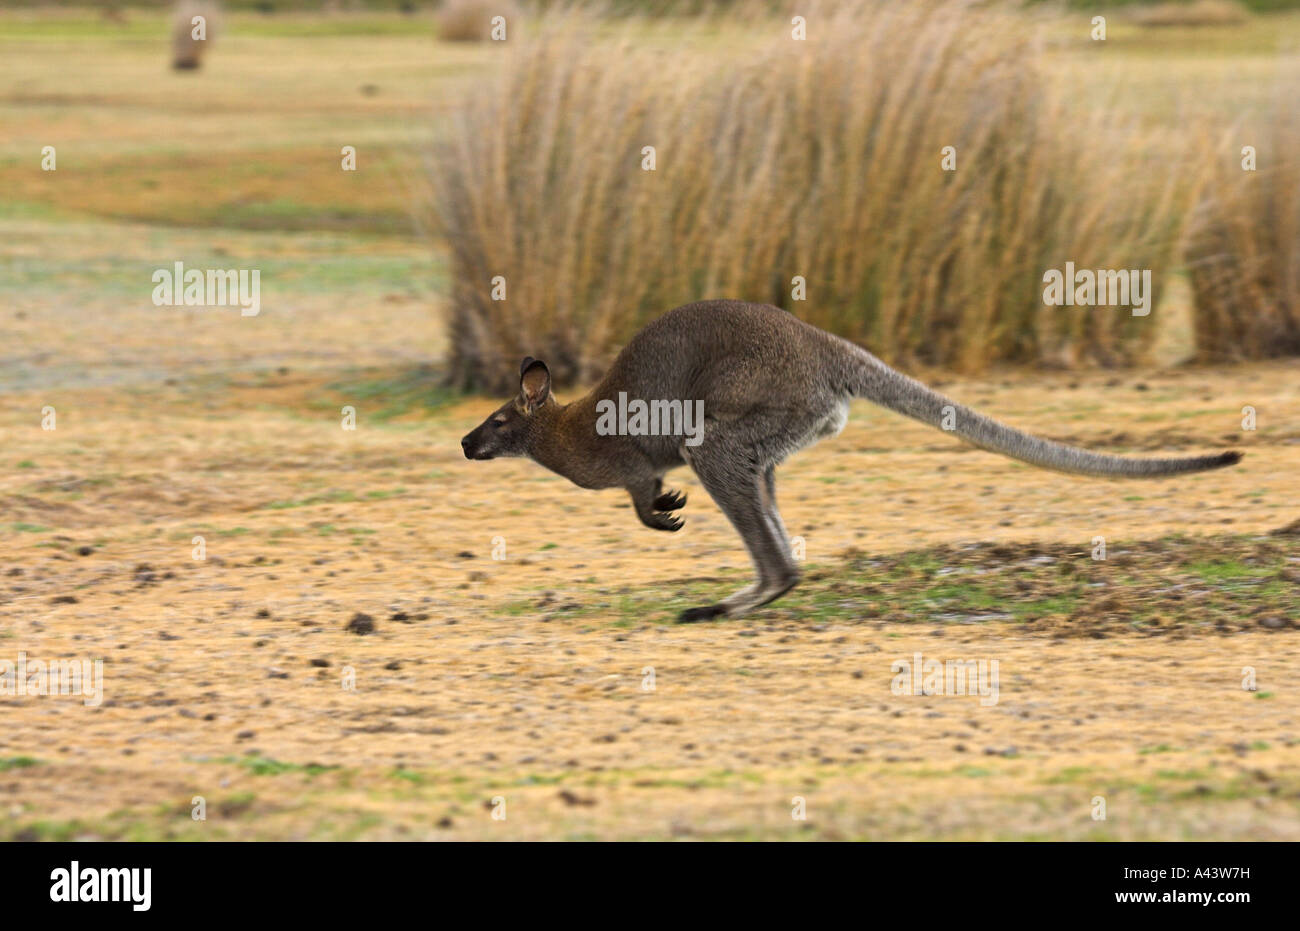 Red-necked, or Bennett's wallaby, macropus rufogriseus, single adult running / jumping Stock Photo